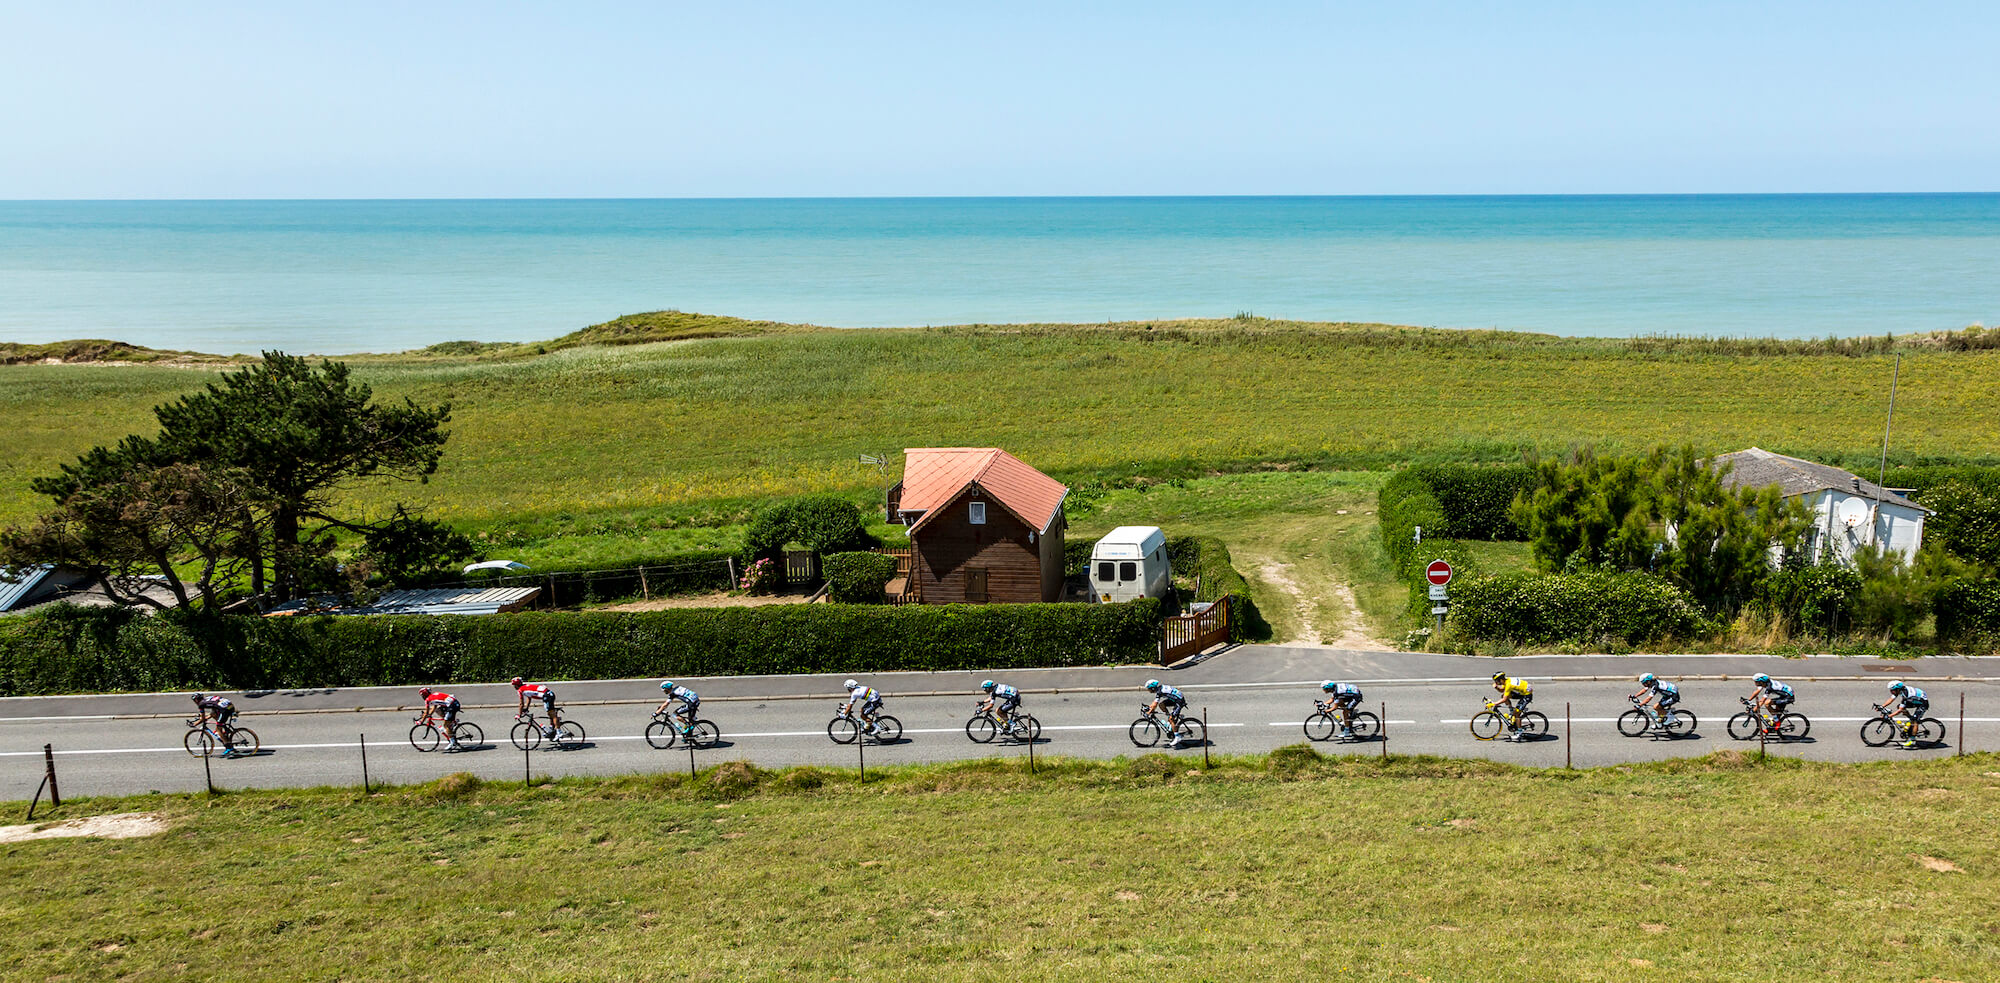 Line of cyclists racing on road by seaside